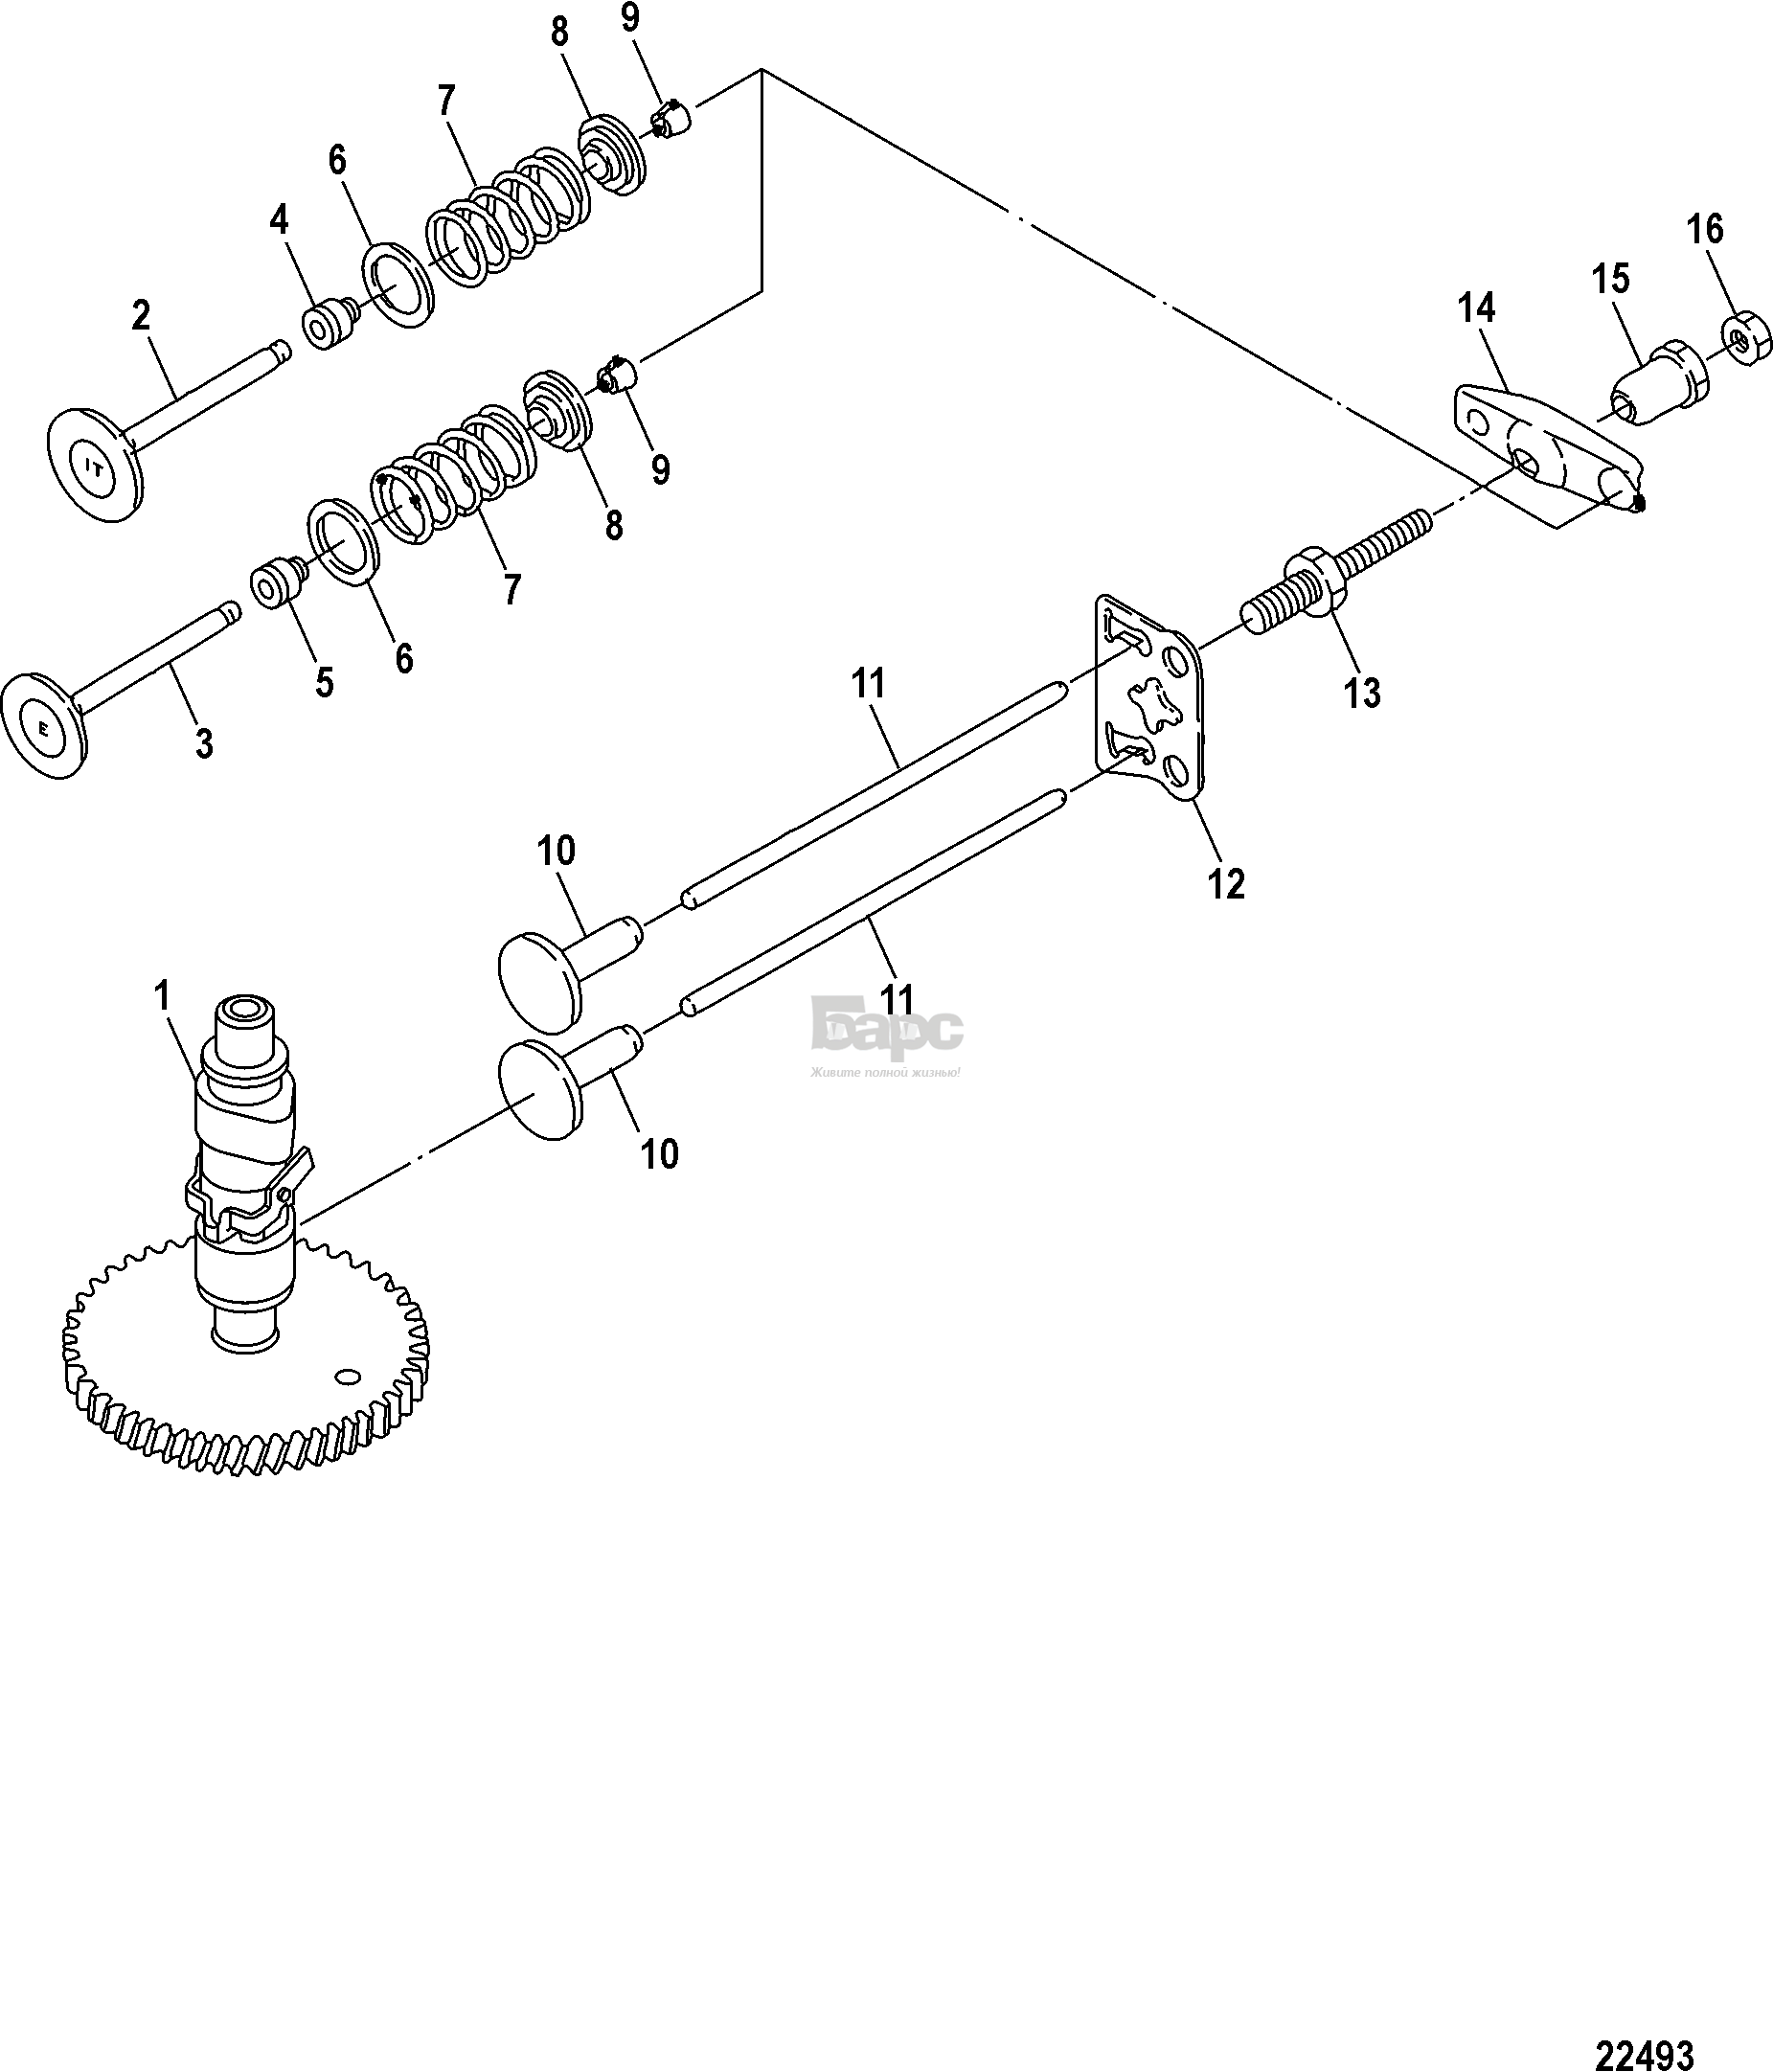 Camshaft and Valves, Serial # 0R318096 and Up